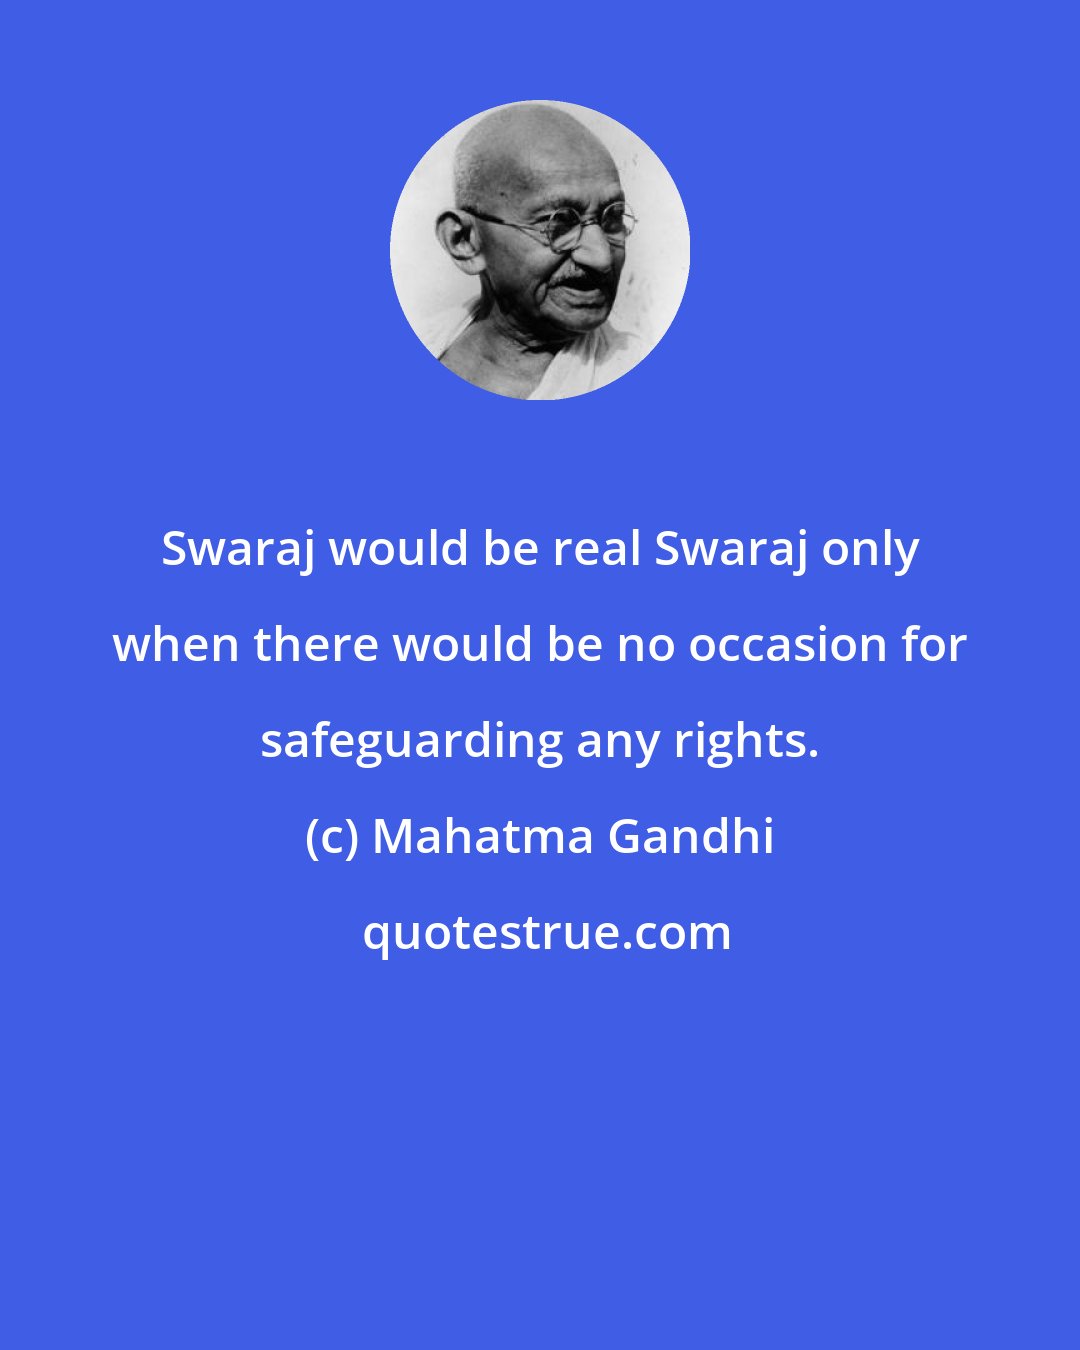 Mahatma Gandhi: Swaraj would be real Swaraj only when there would be no occasion for safeguarding any rights.